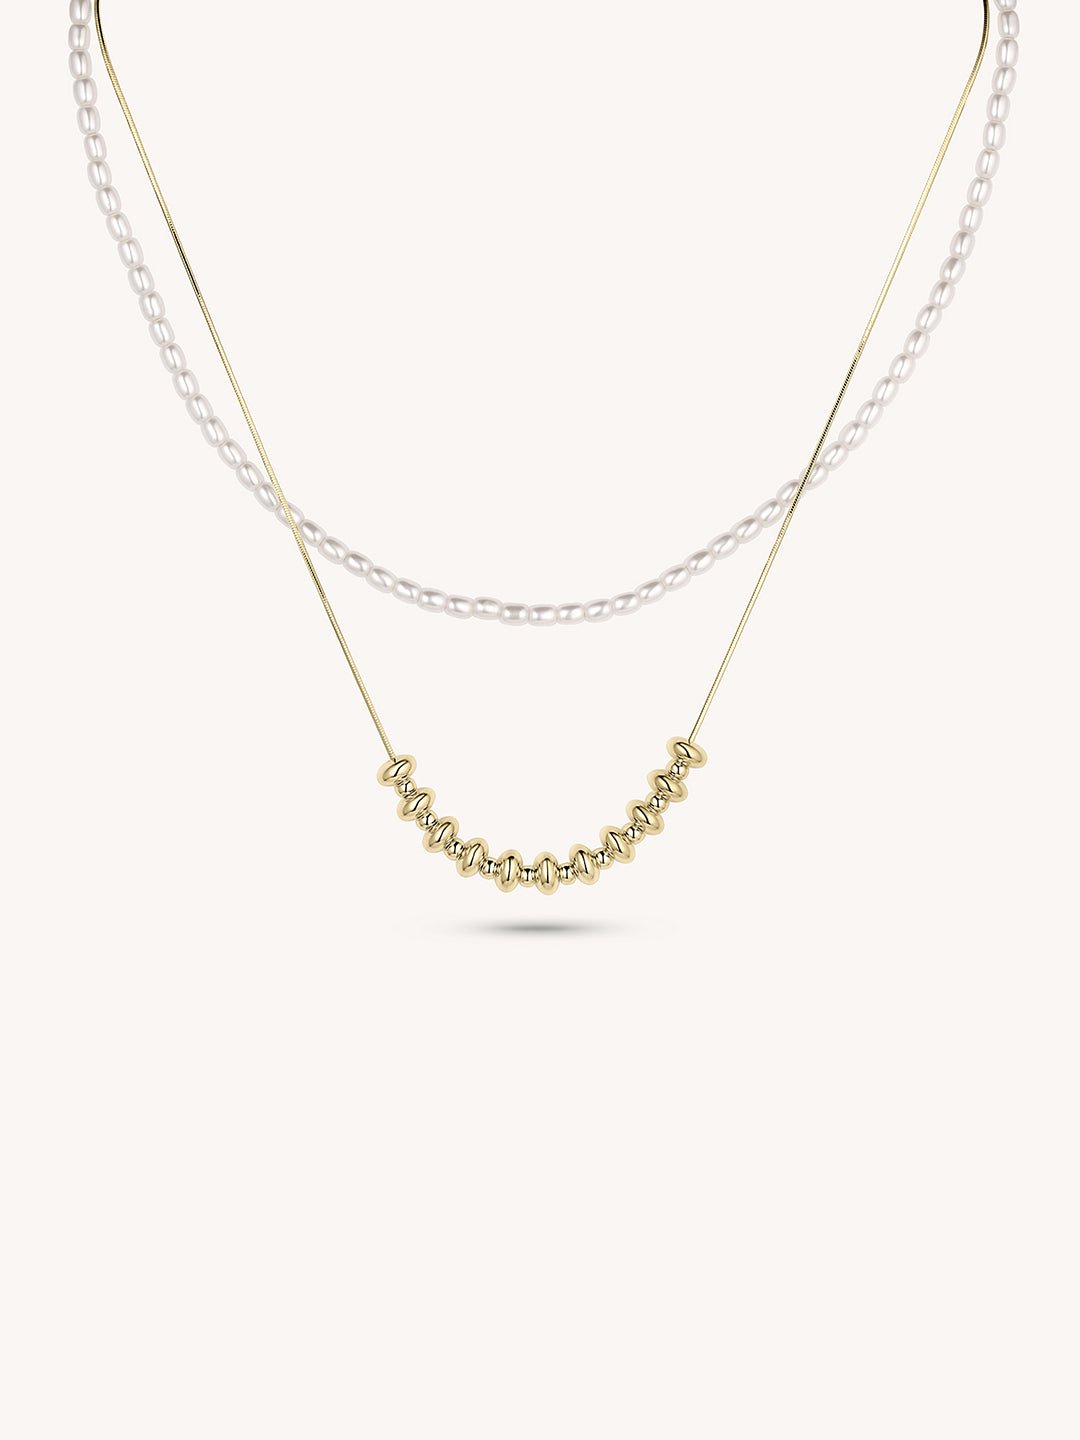 14K gold plated Poise and Pearls Necklace - Revermejewelry